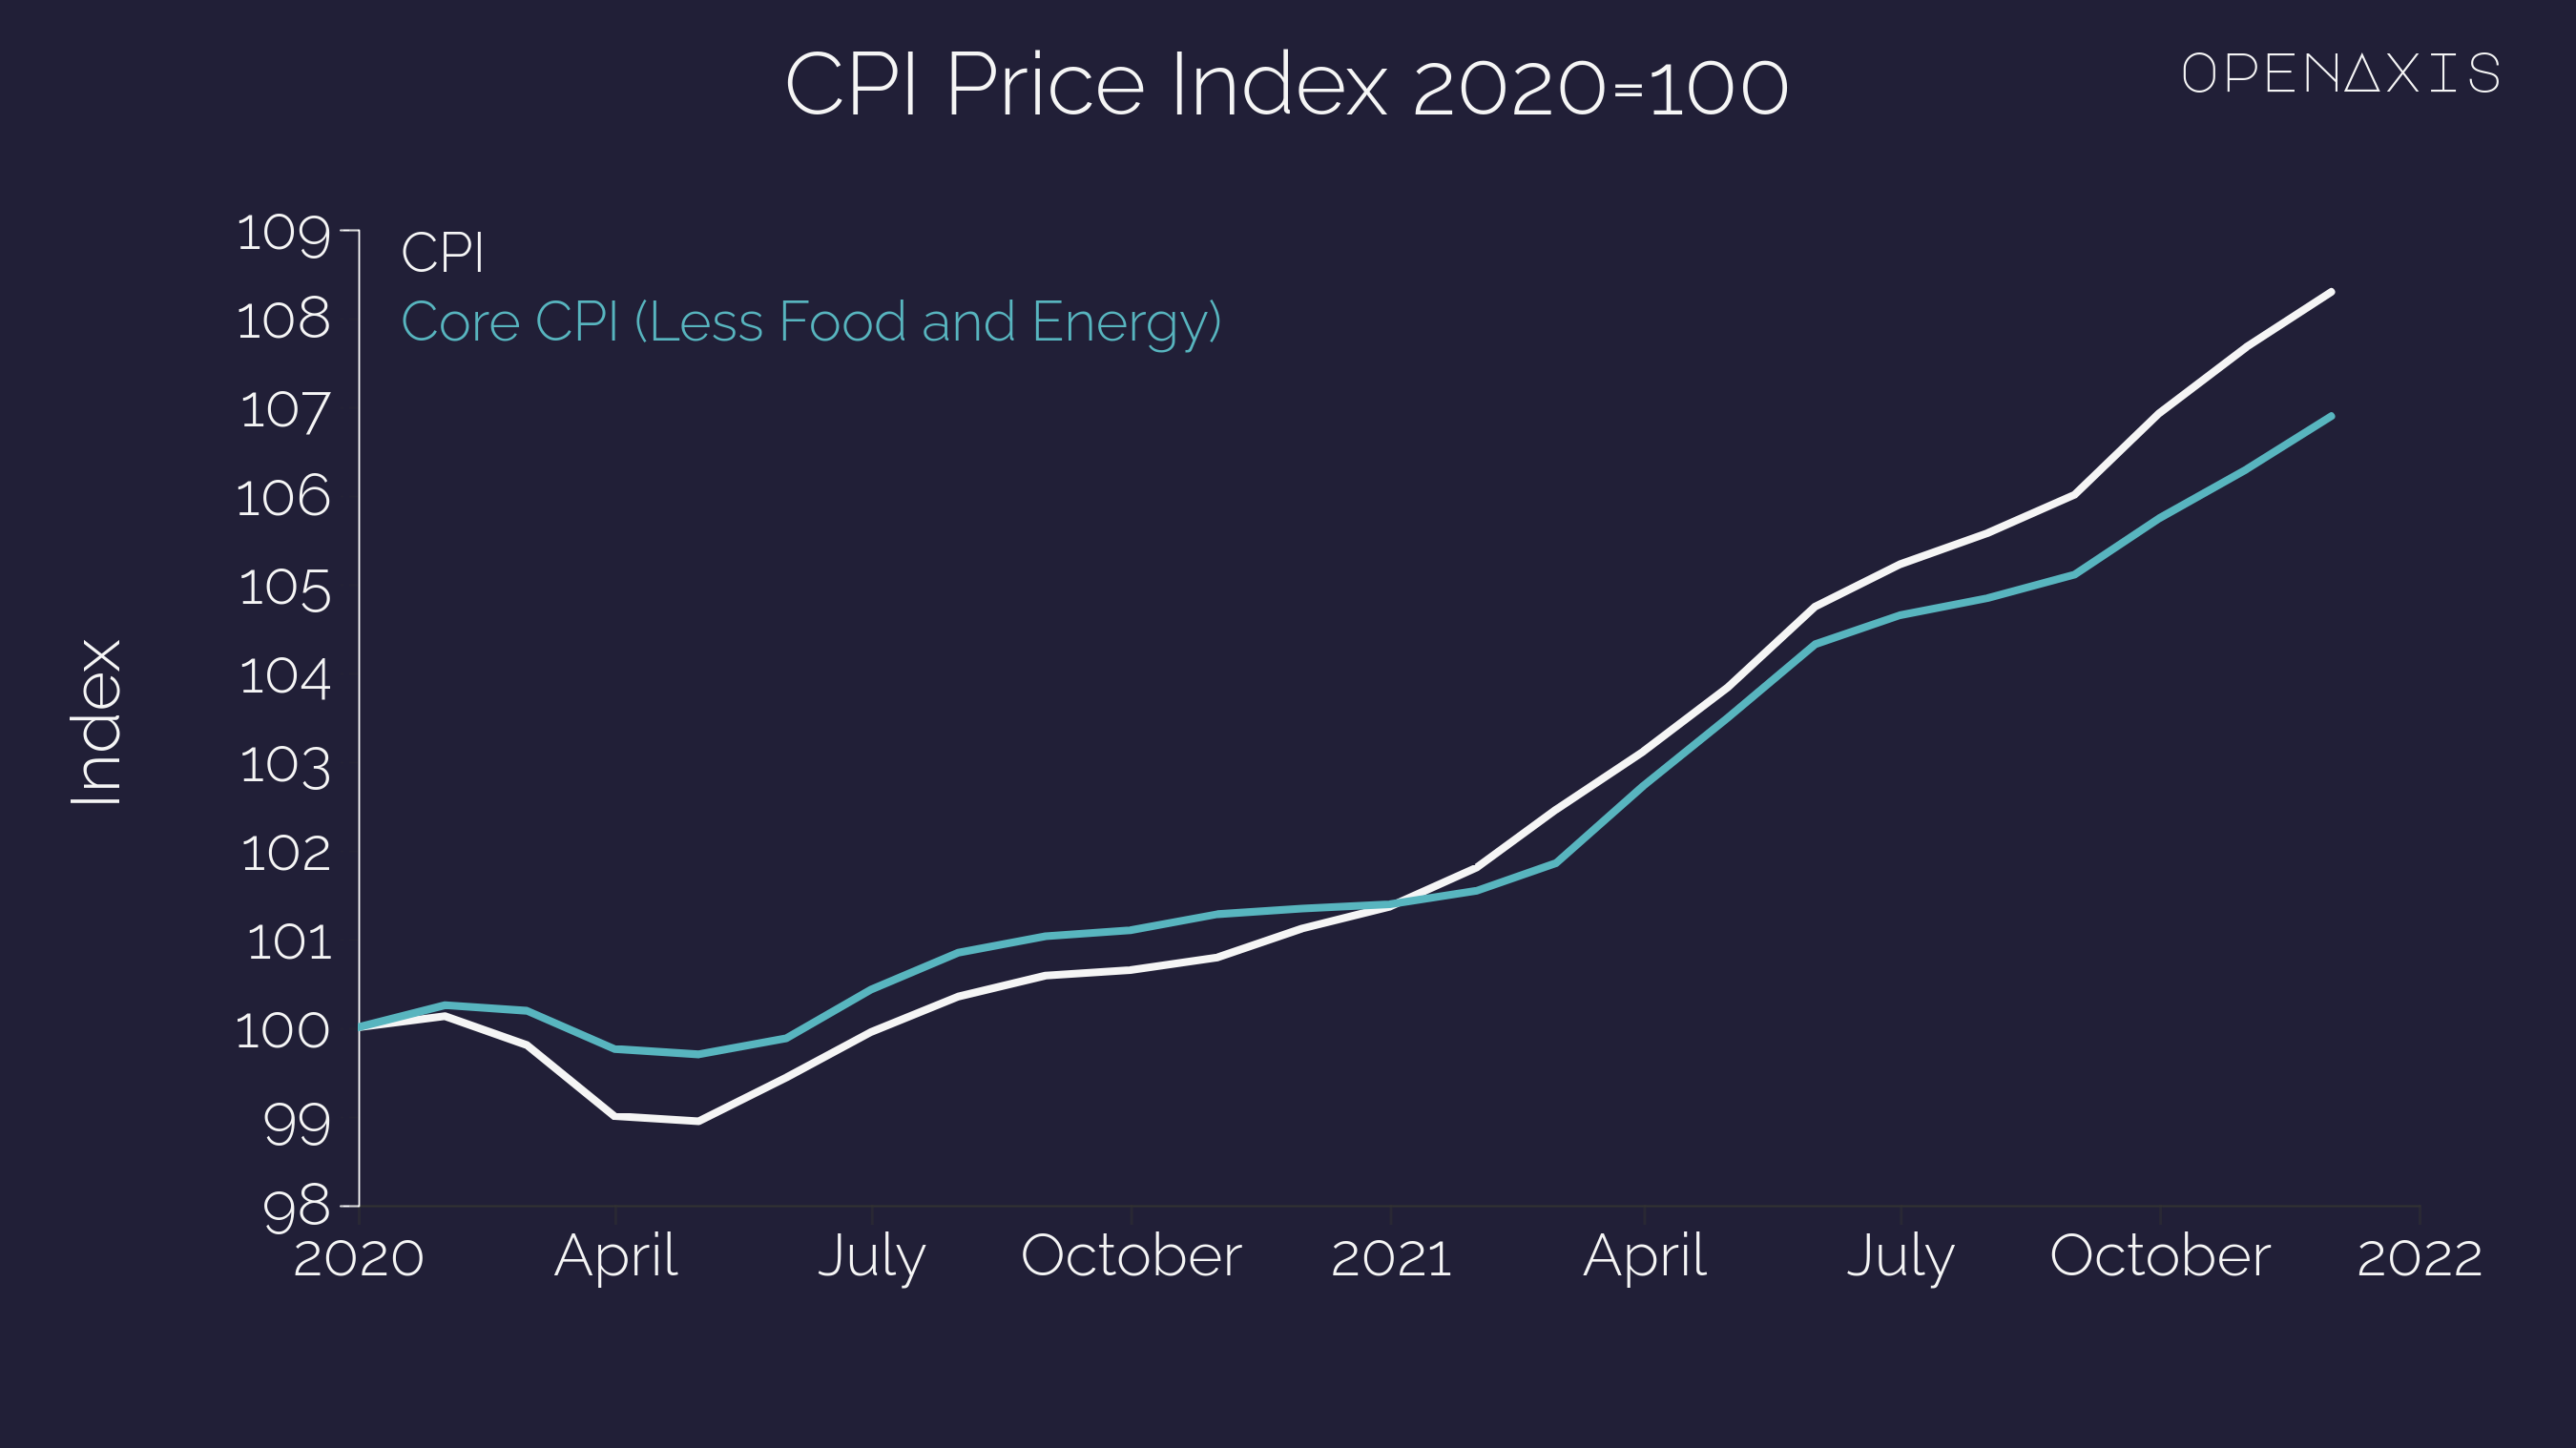 <p>A lot of people are focusing on y/y but last year was not a normal year. We should look at total CPI and wage increase since the start of the pandemic.  </p><p>Since Jan 2020 CPI is up 9%</p><p>Since Jan 2020 Average Hourly Earnings are up 12.6%</p><p><br /></p><p>﻿<a href="/search?q=%23economy" target="_self">#economy</a>﻿ ﻿<a href="/search?q=%23inflation" target="_self">#inflation</a>﻿ </p>